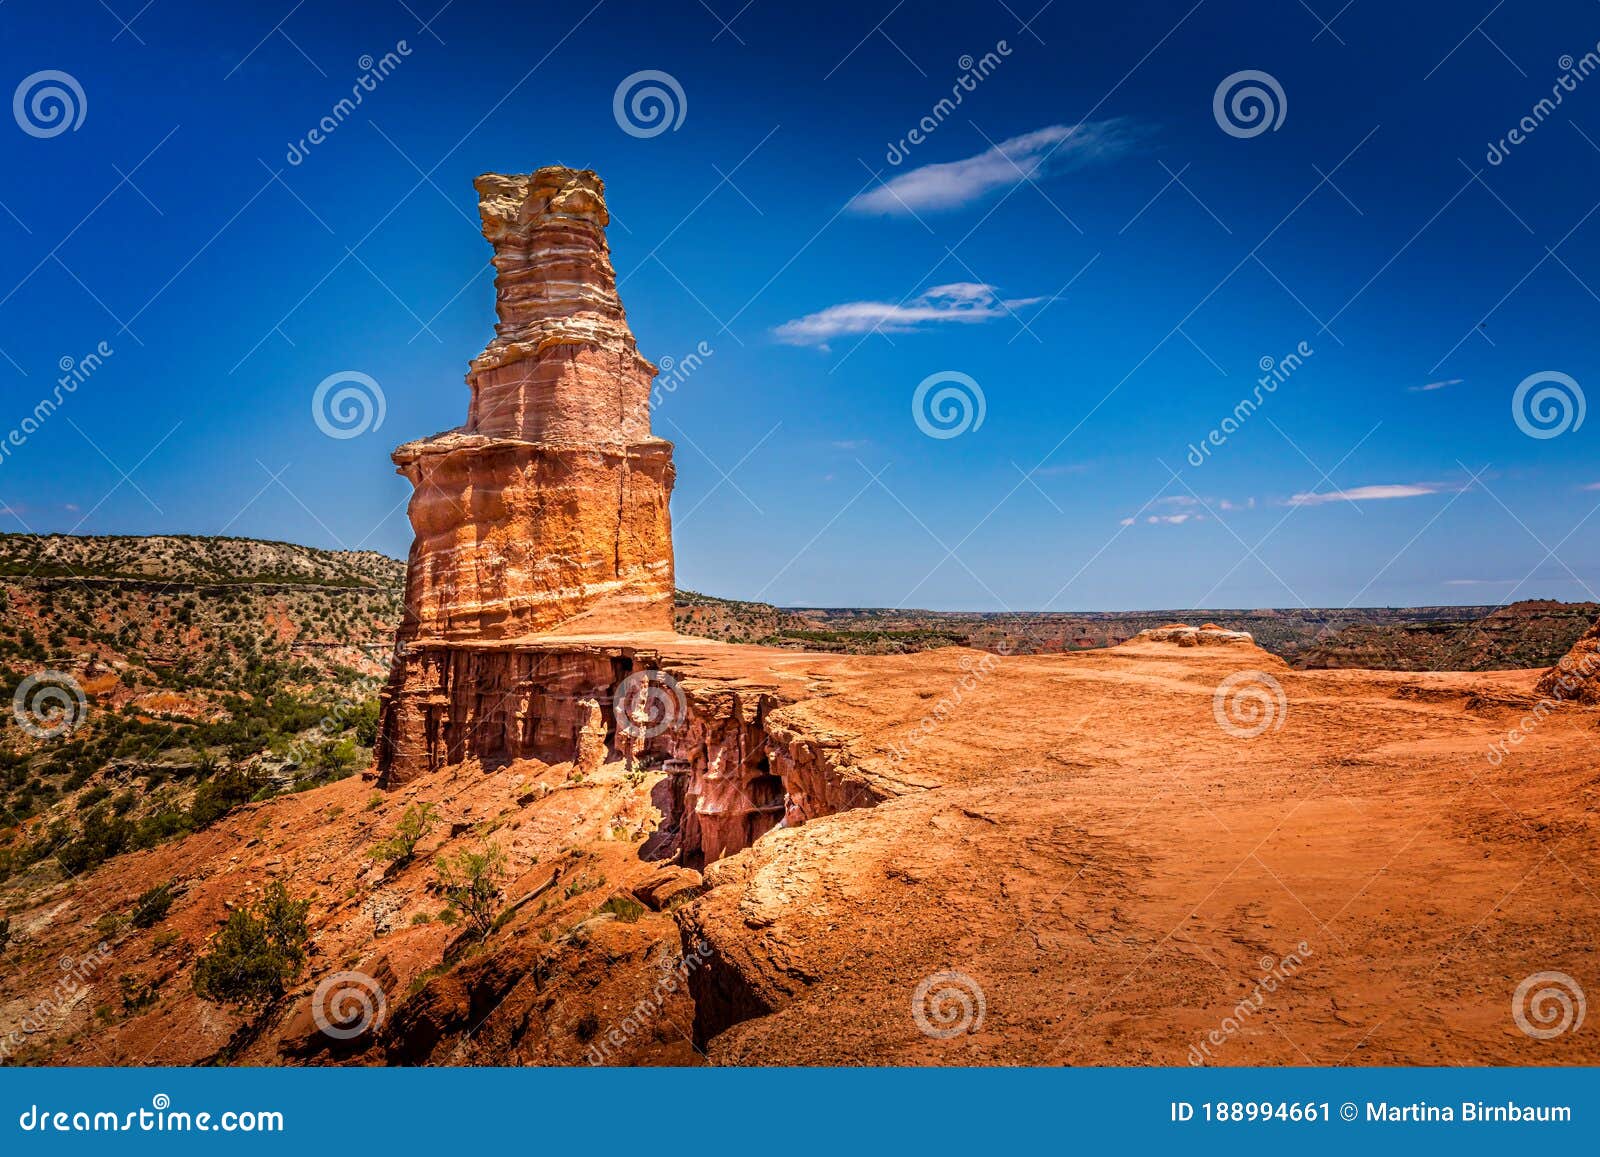 the famous lighthouse rock at palo duro canyon